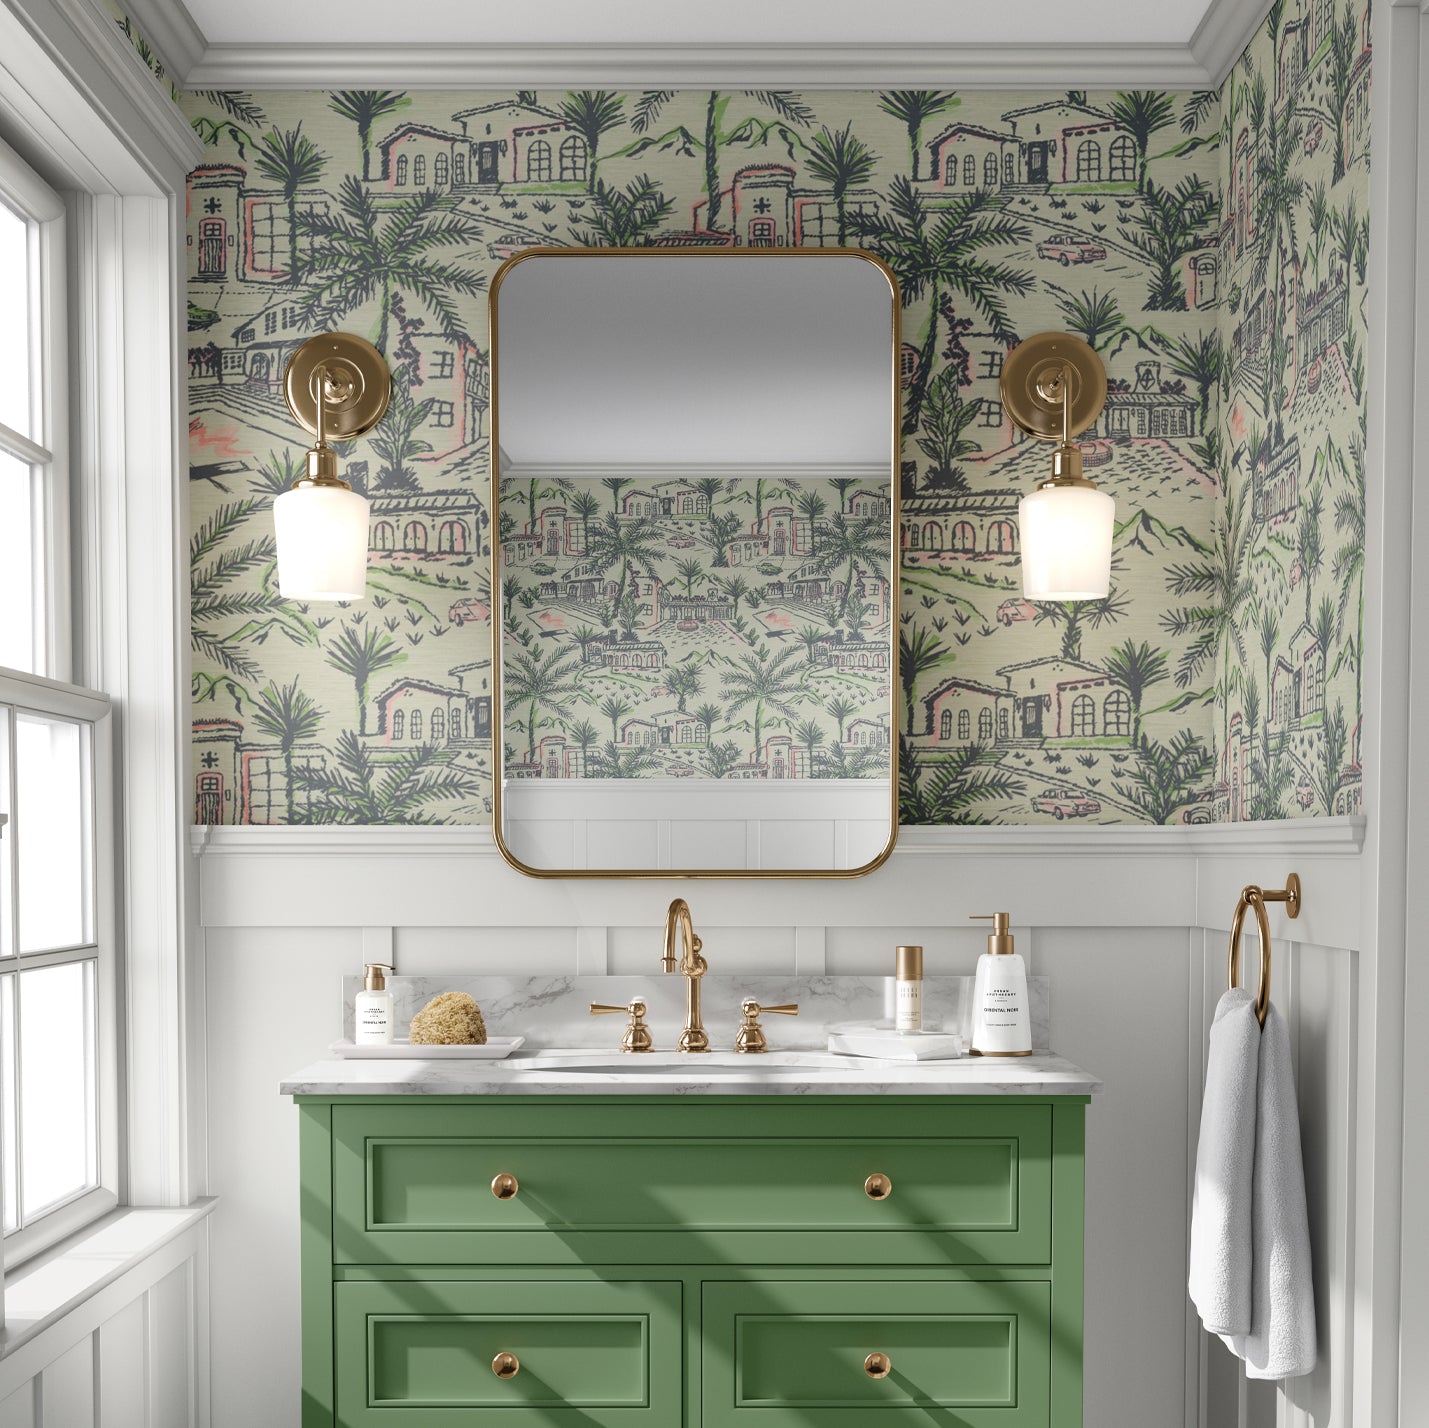 Bathroom with grasscloth wallpaper in modern toile print with Spanish style architecture houses, palm trees, pools, 1980s vintage cars mountains in the background. The print is a light green base with dark green, bright neon green and splashes of neon coral print